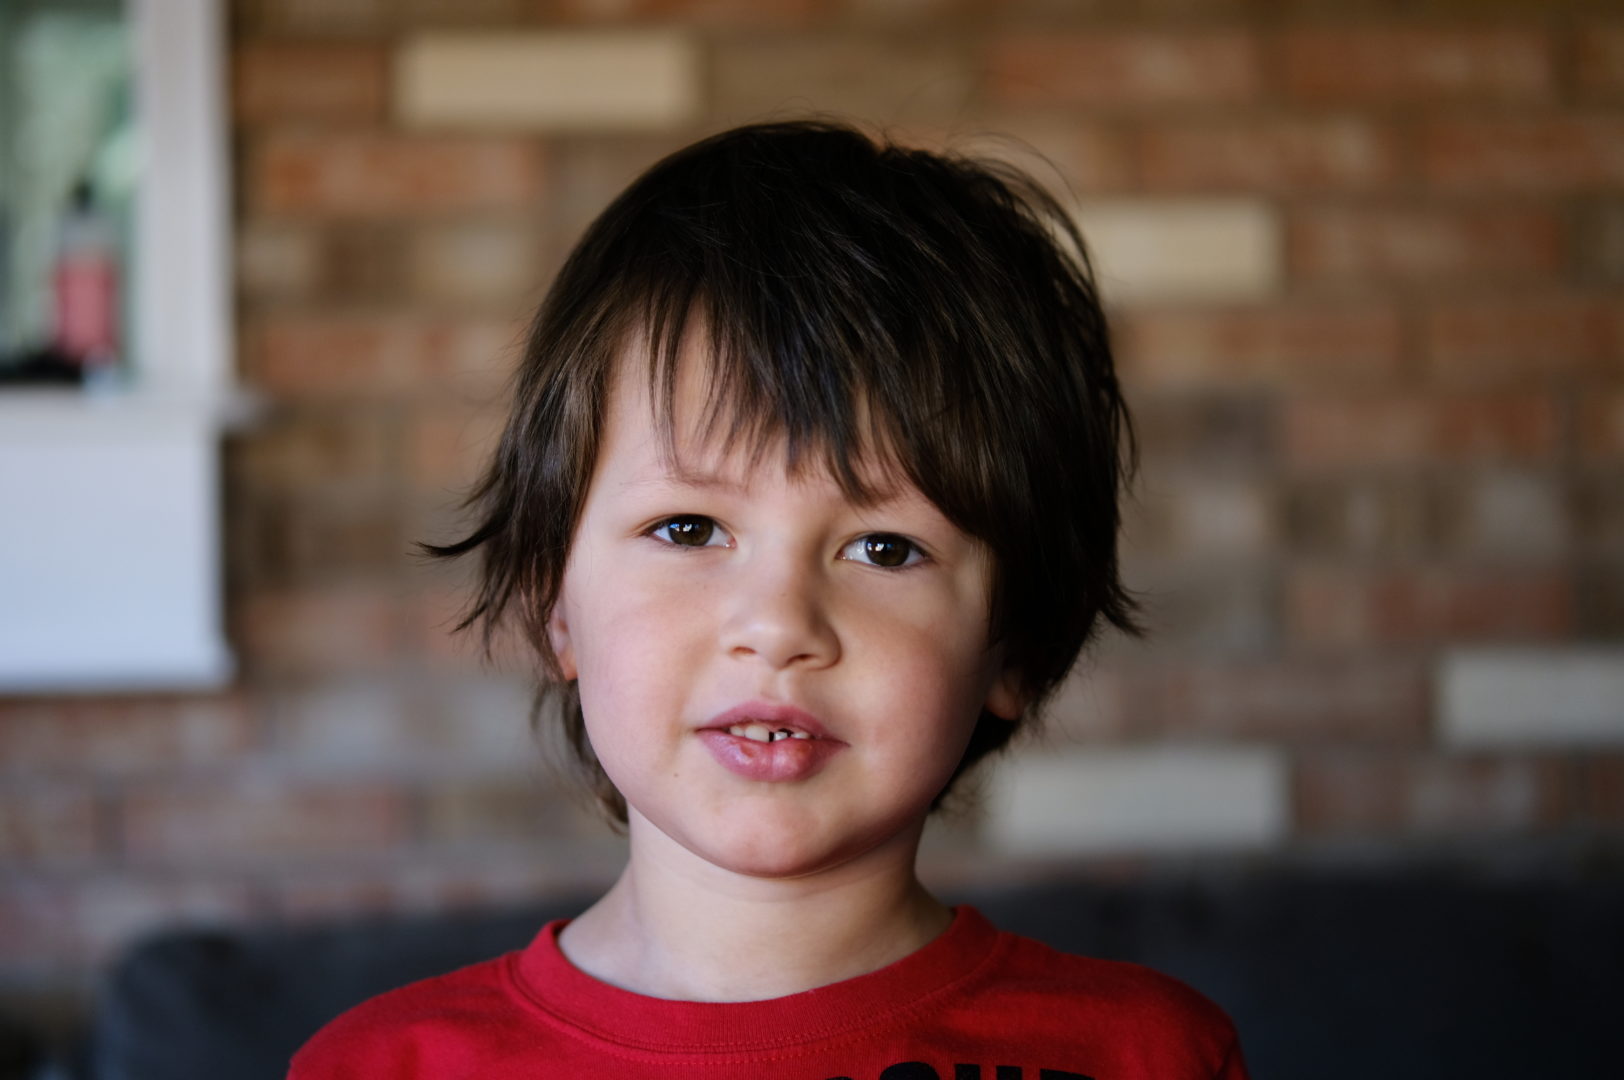 A 5 year old boy with scraggly hair looks at the camera.